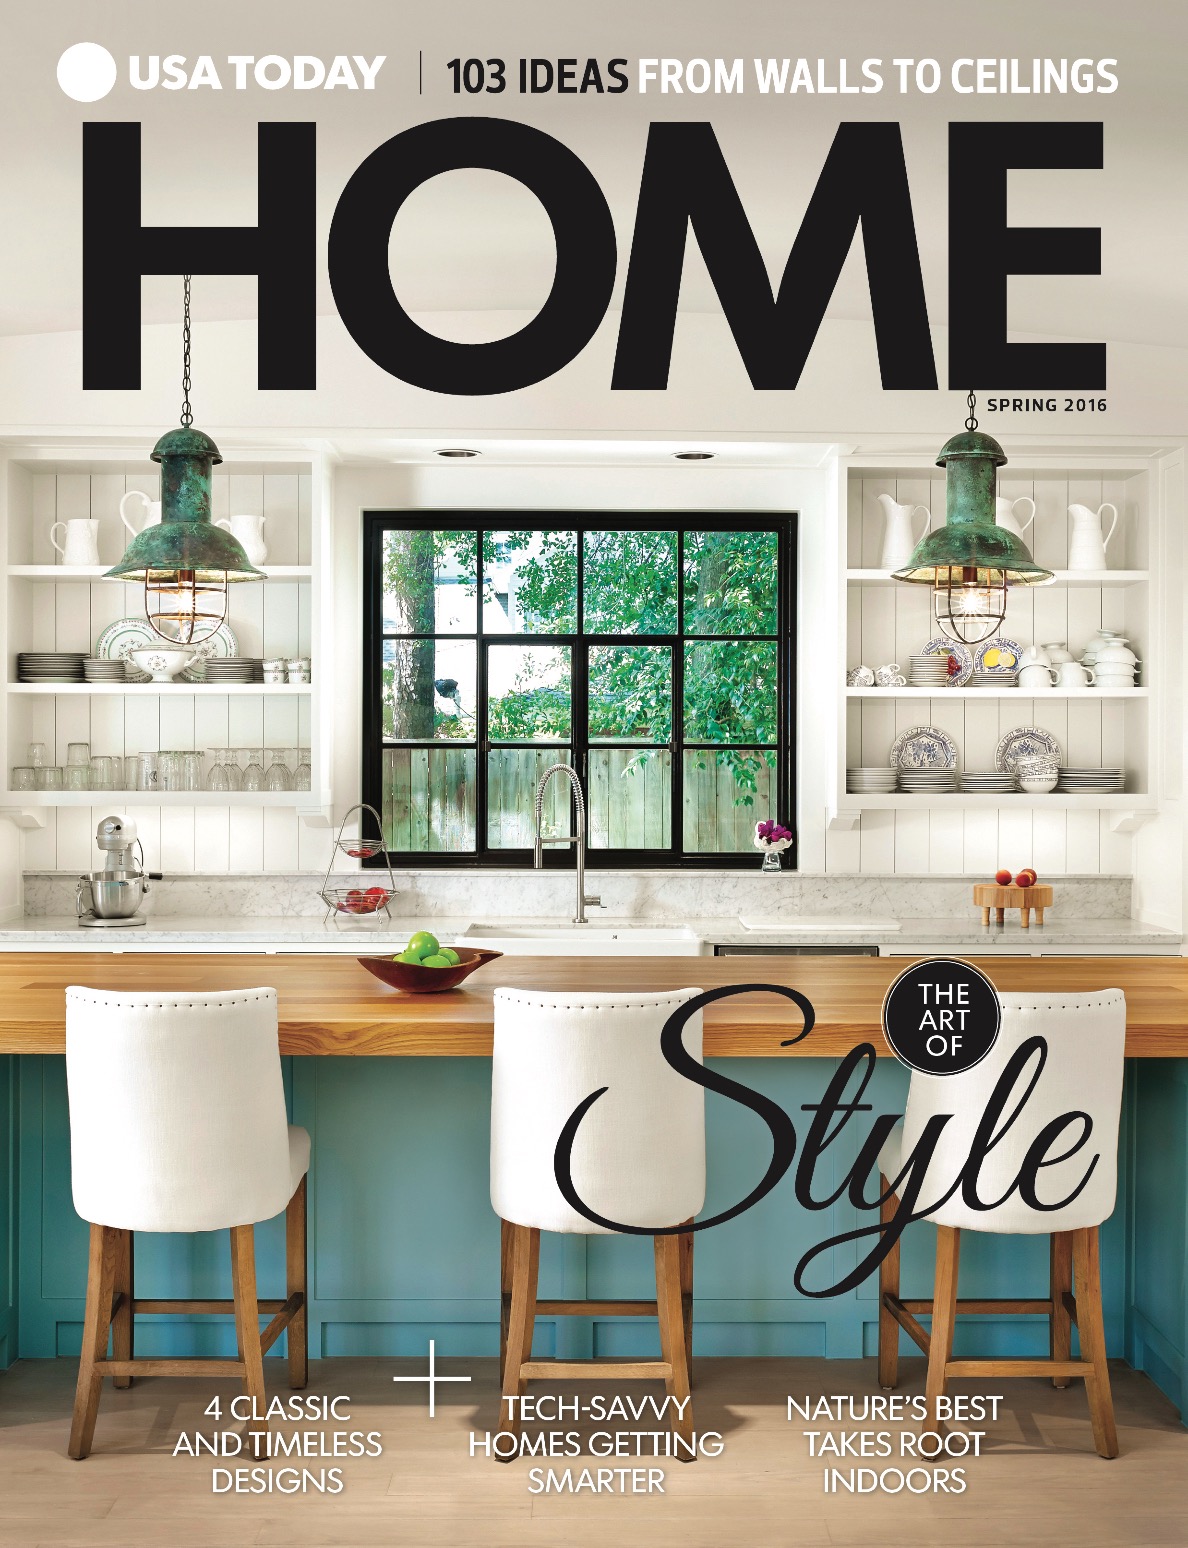 Now on newsstands nationwide, USA Today Home Magazine writer Hollie Deese asked Carbine’s Daryl Walny about the trend in quartz-based counters